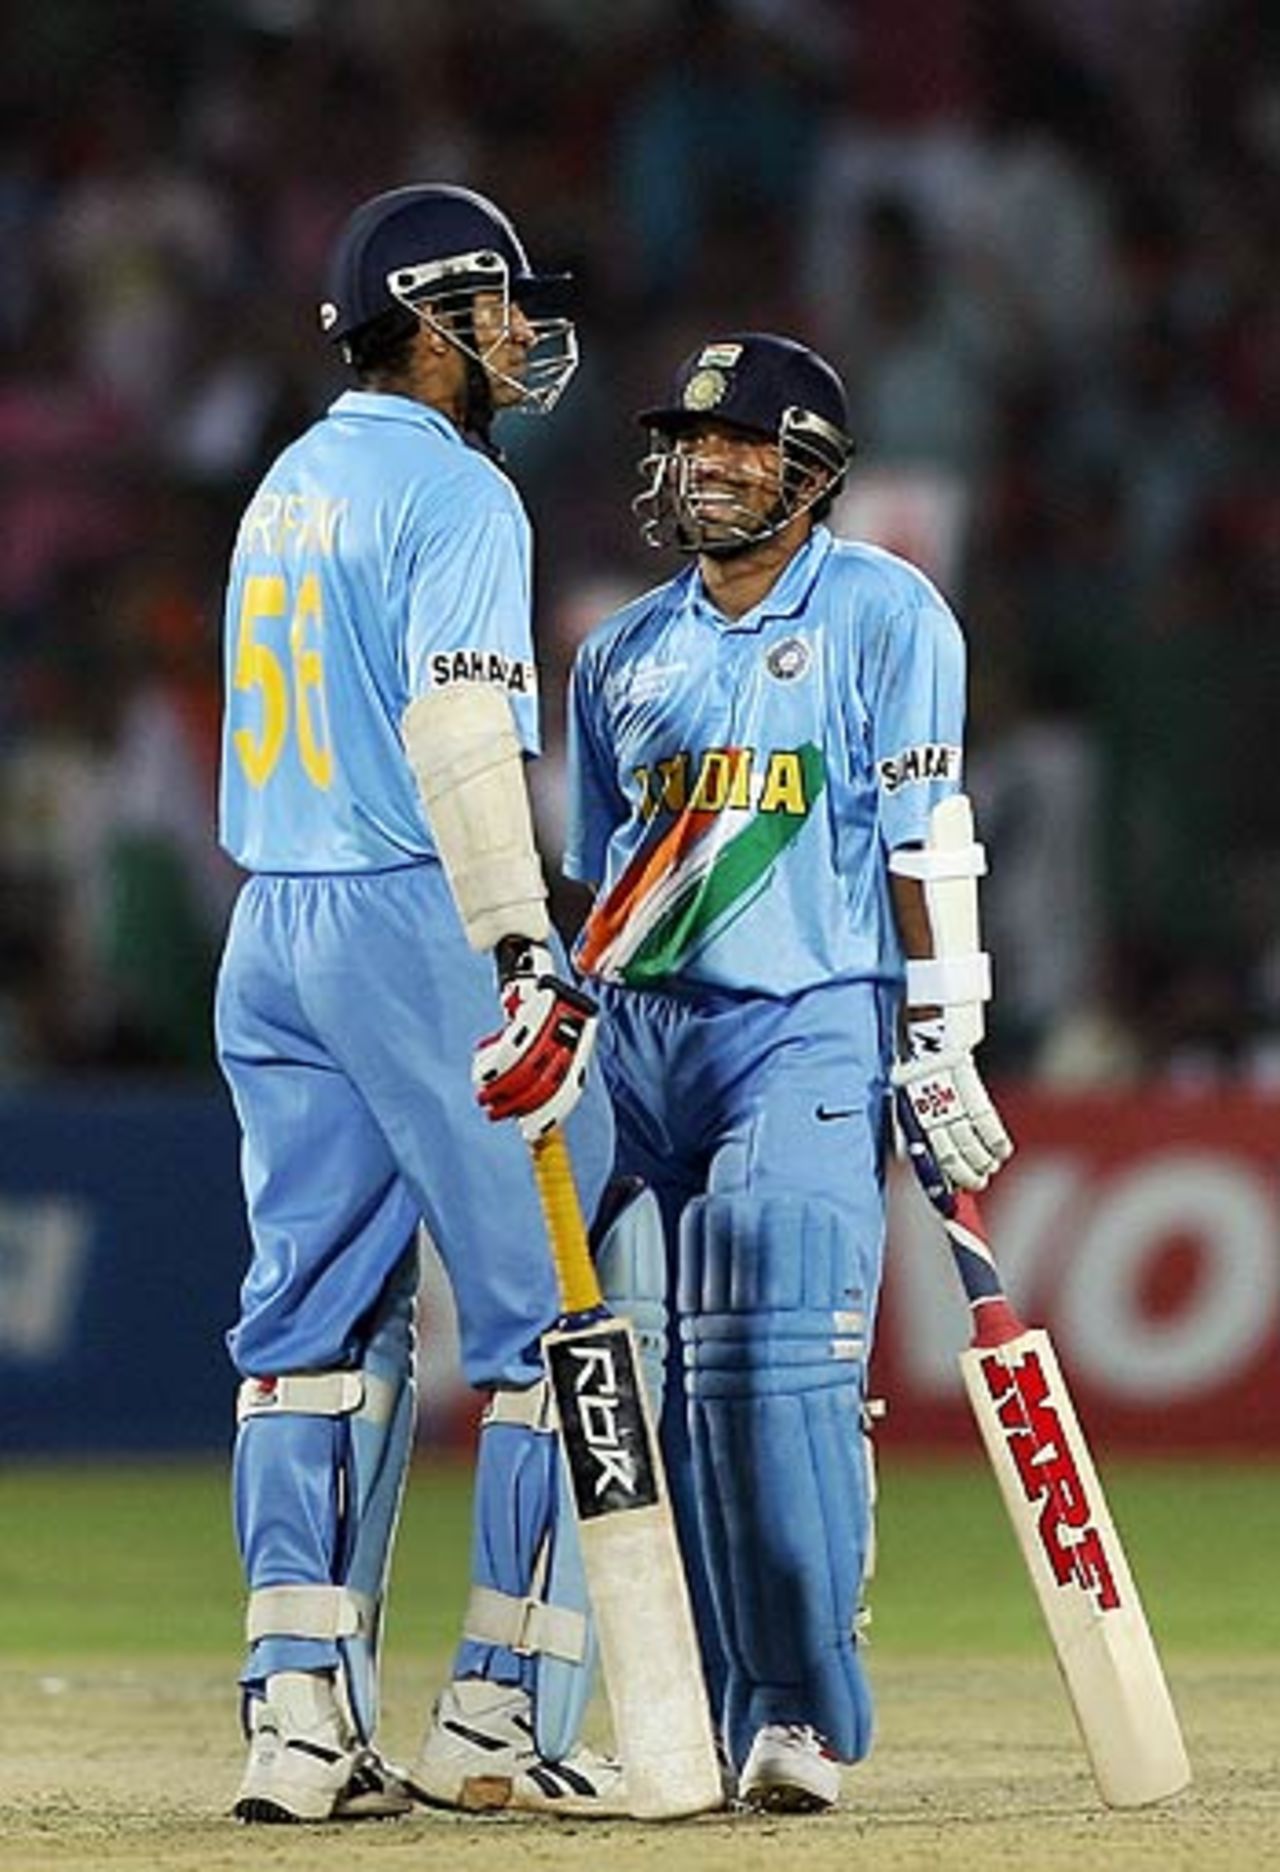 Irfan Pathan and Sachin Tendulkar added 50 after the loss of Virender Sehwag, India v England, 1st match, Champions Trophy, Sawai Mansingh Stadium, Jaipur, October 15, 2006